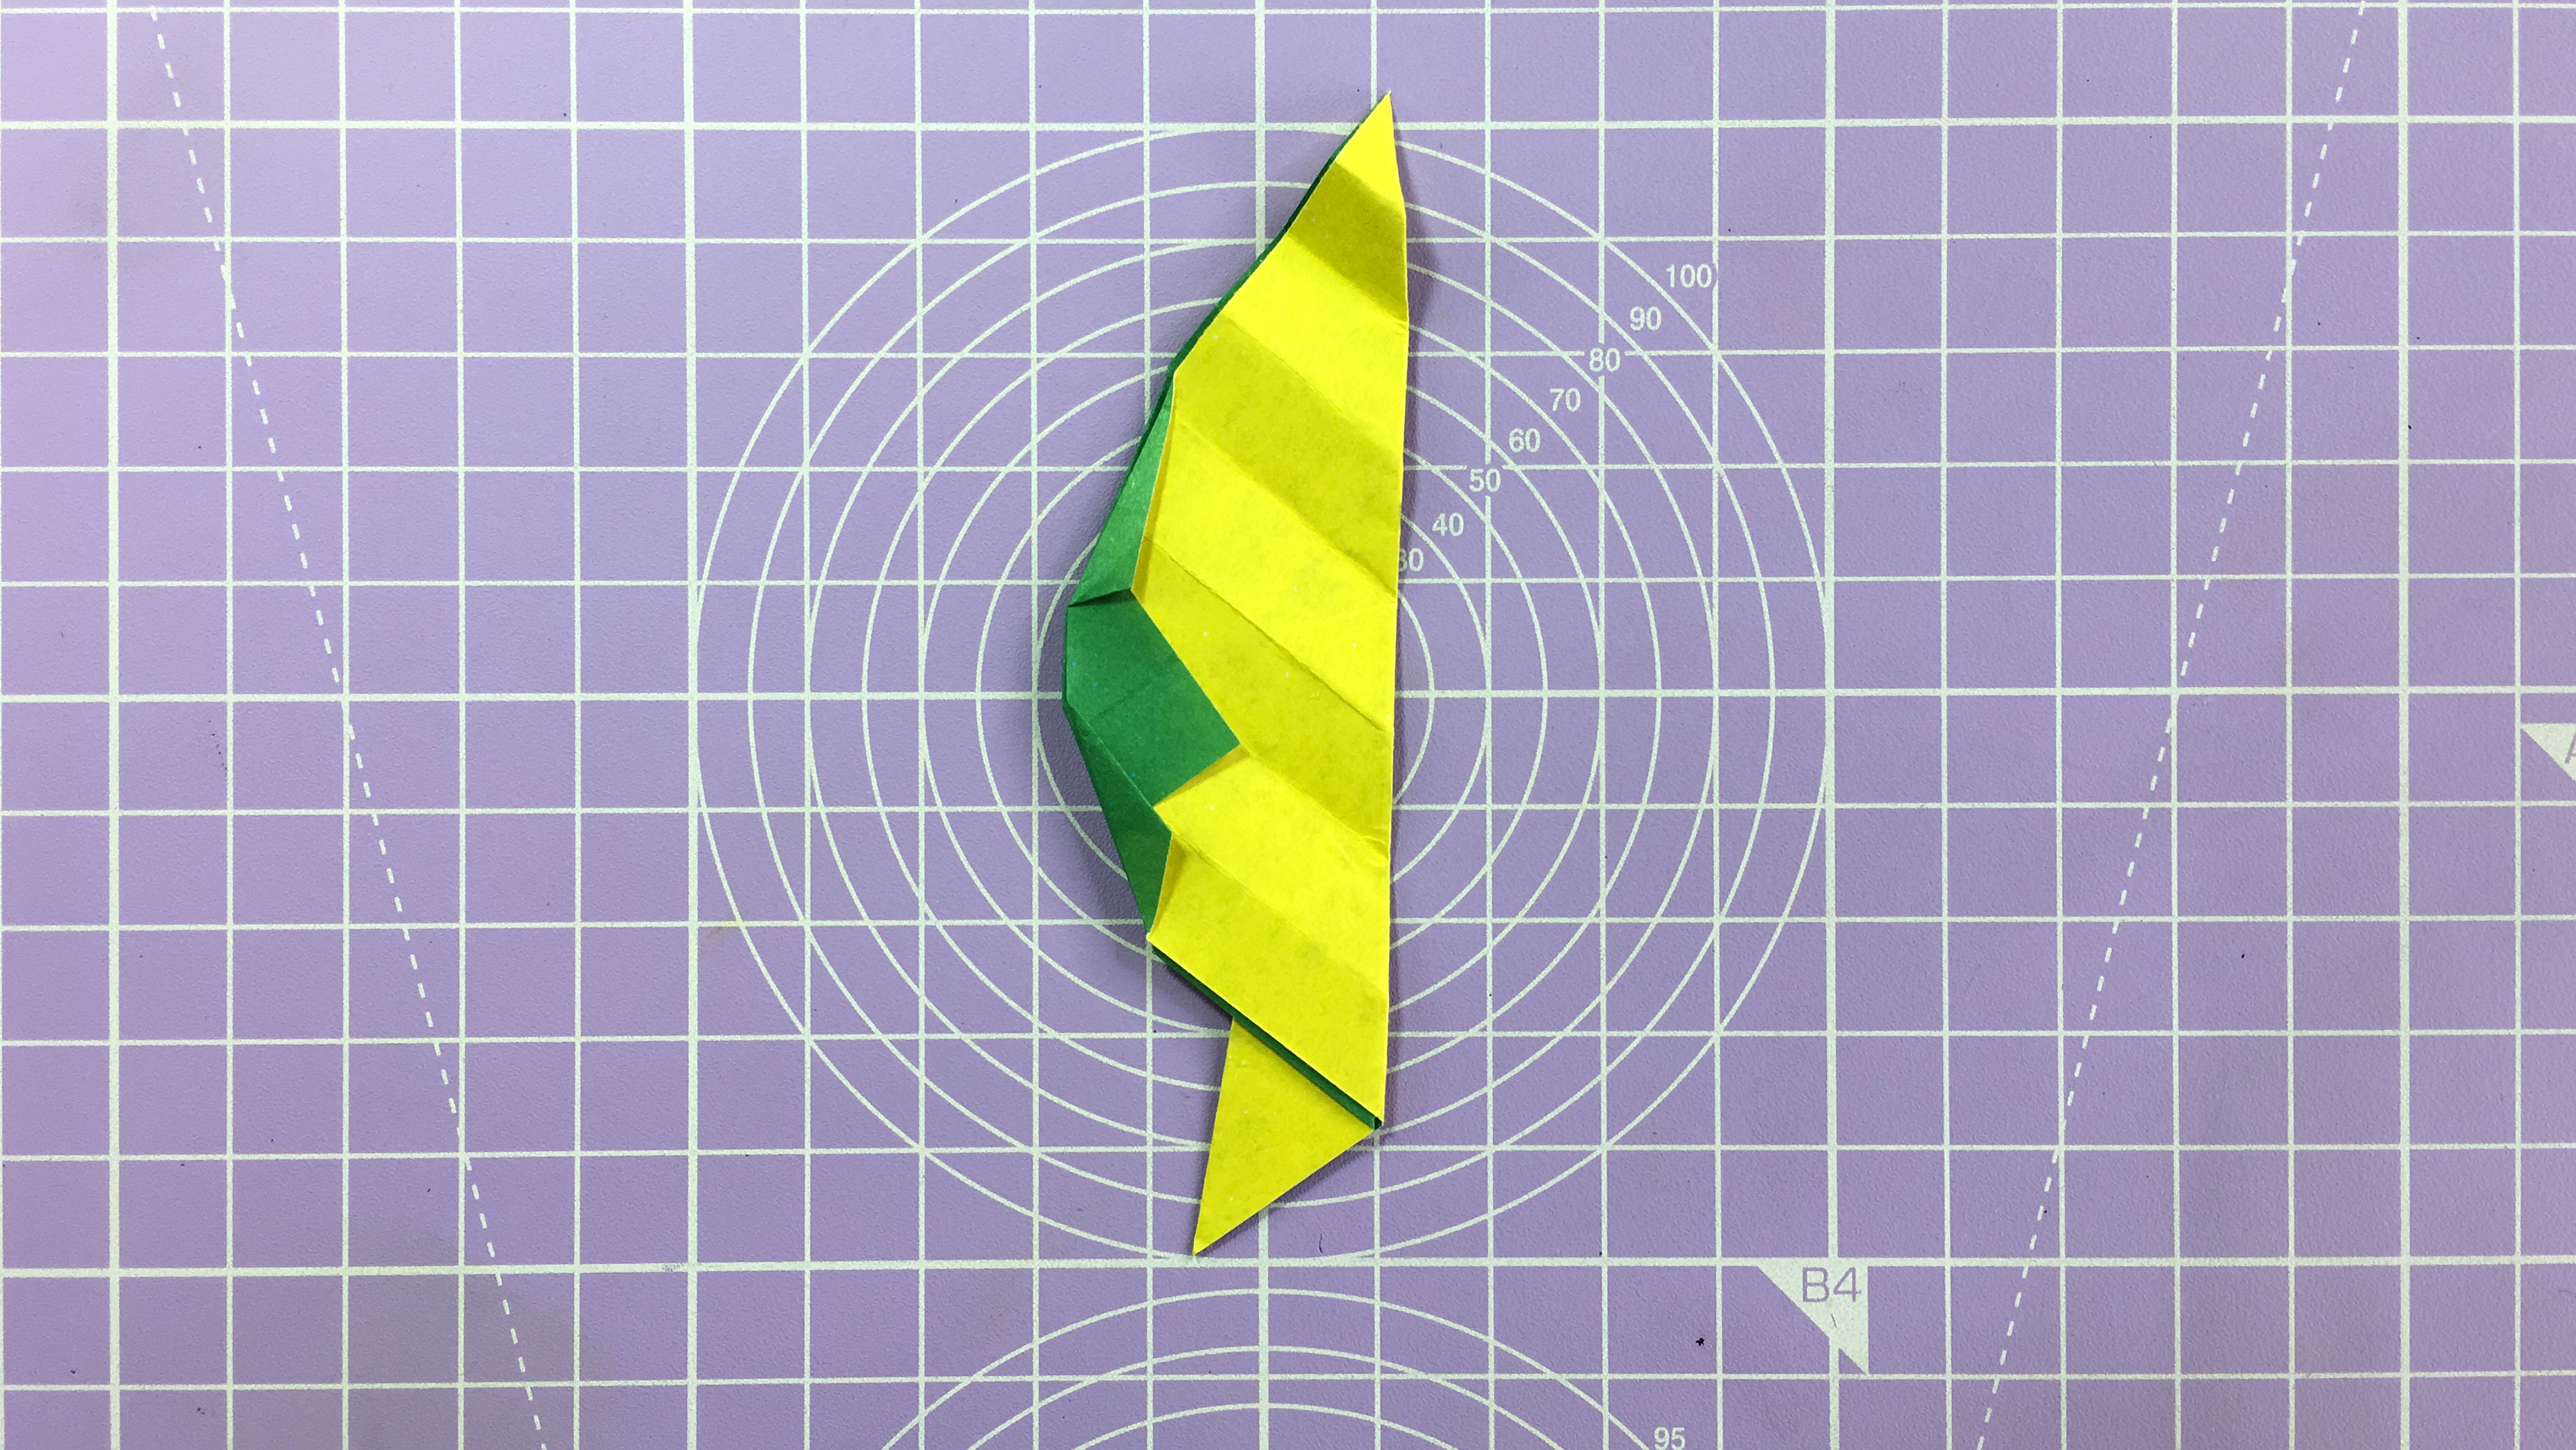 How to make an easy origami leaf - step 14d